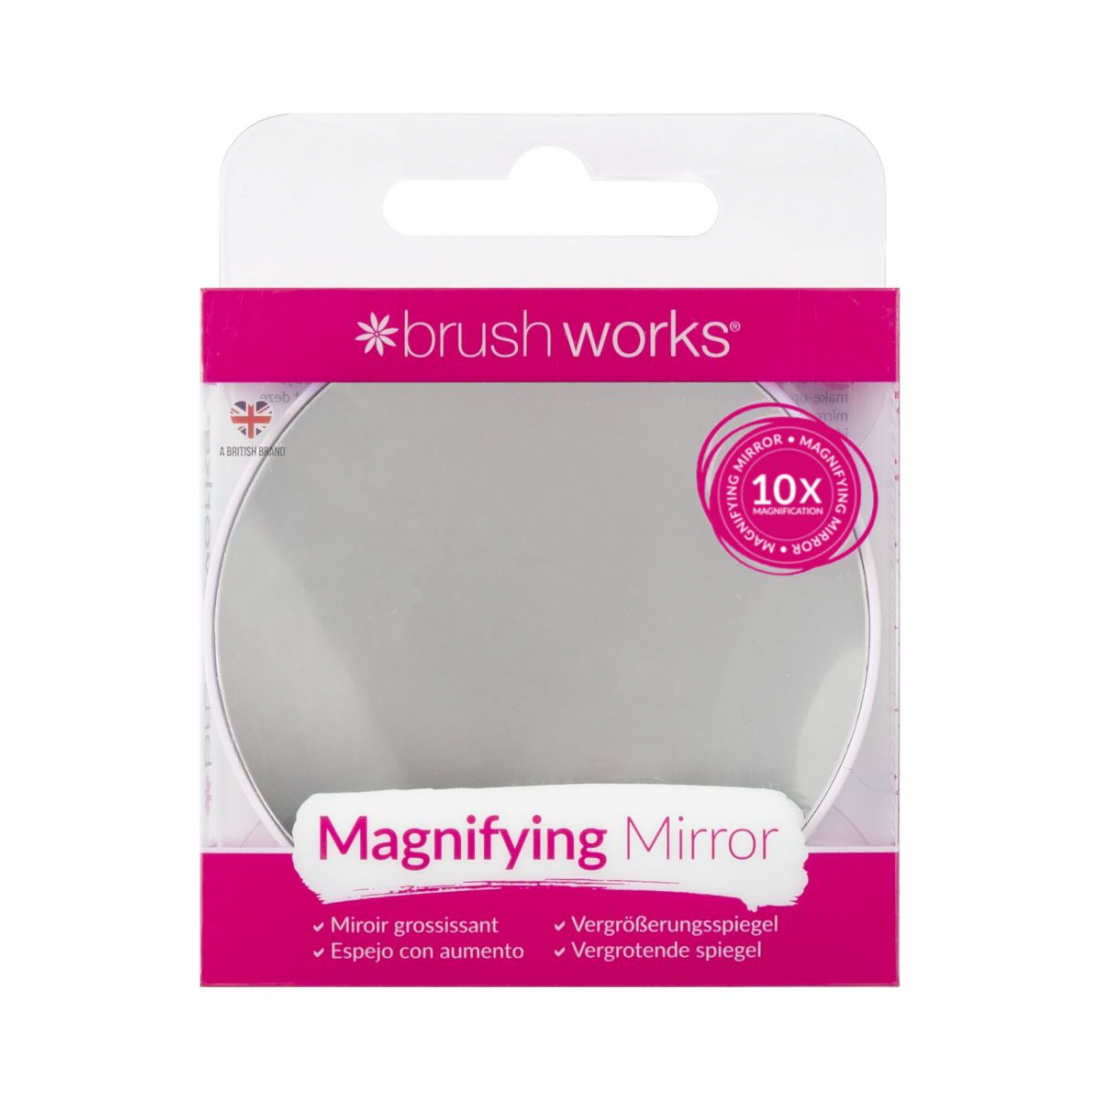 10X Magnification' Magnifying Mirror